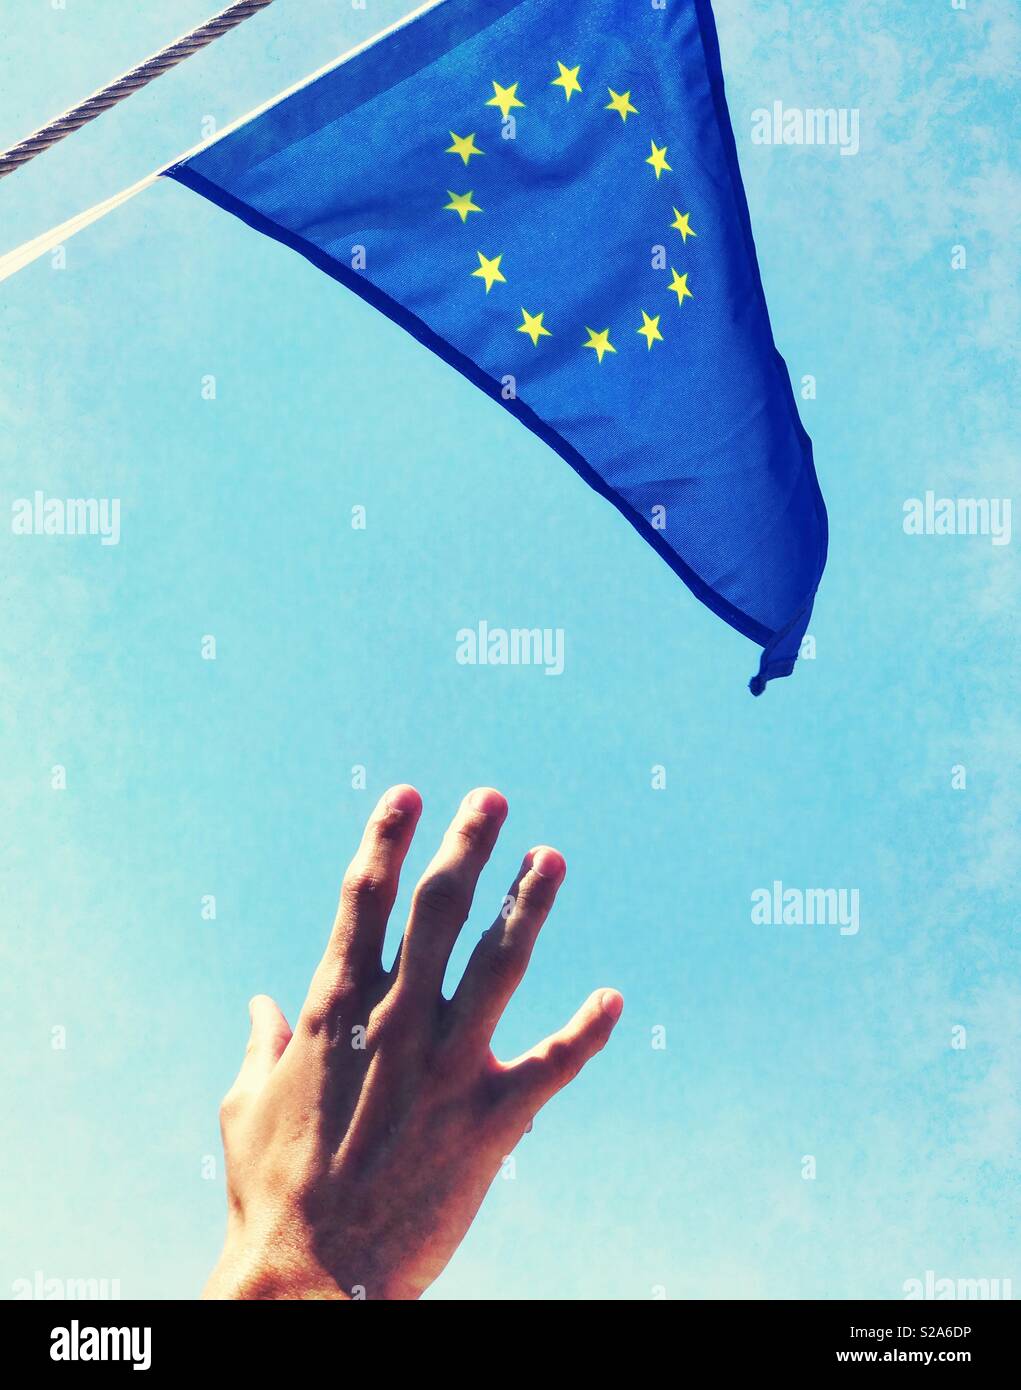 A hand reaches for the EU flag in a mottled blue sky Stock Photo